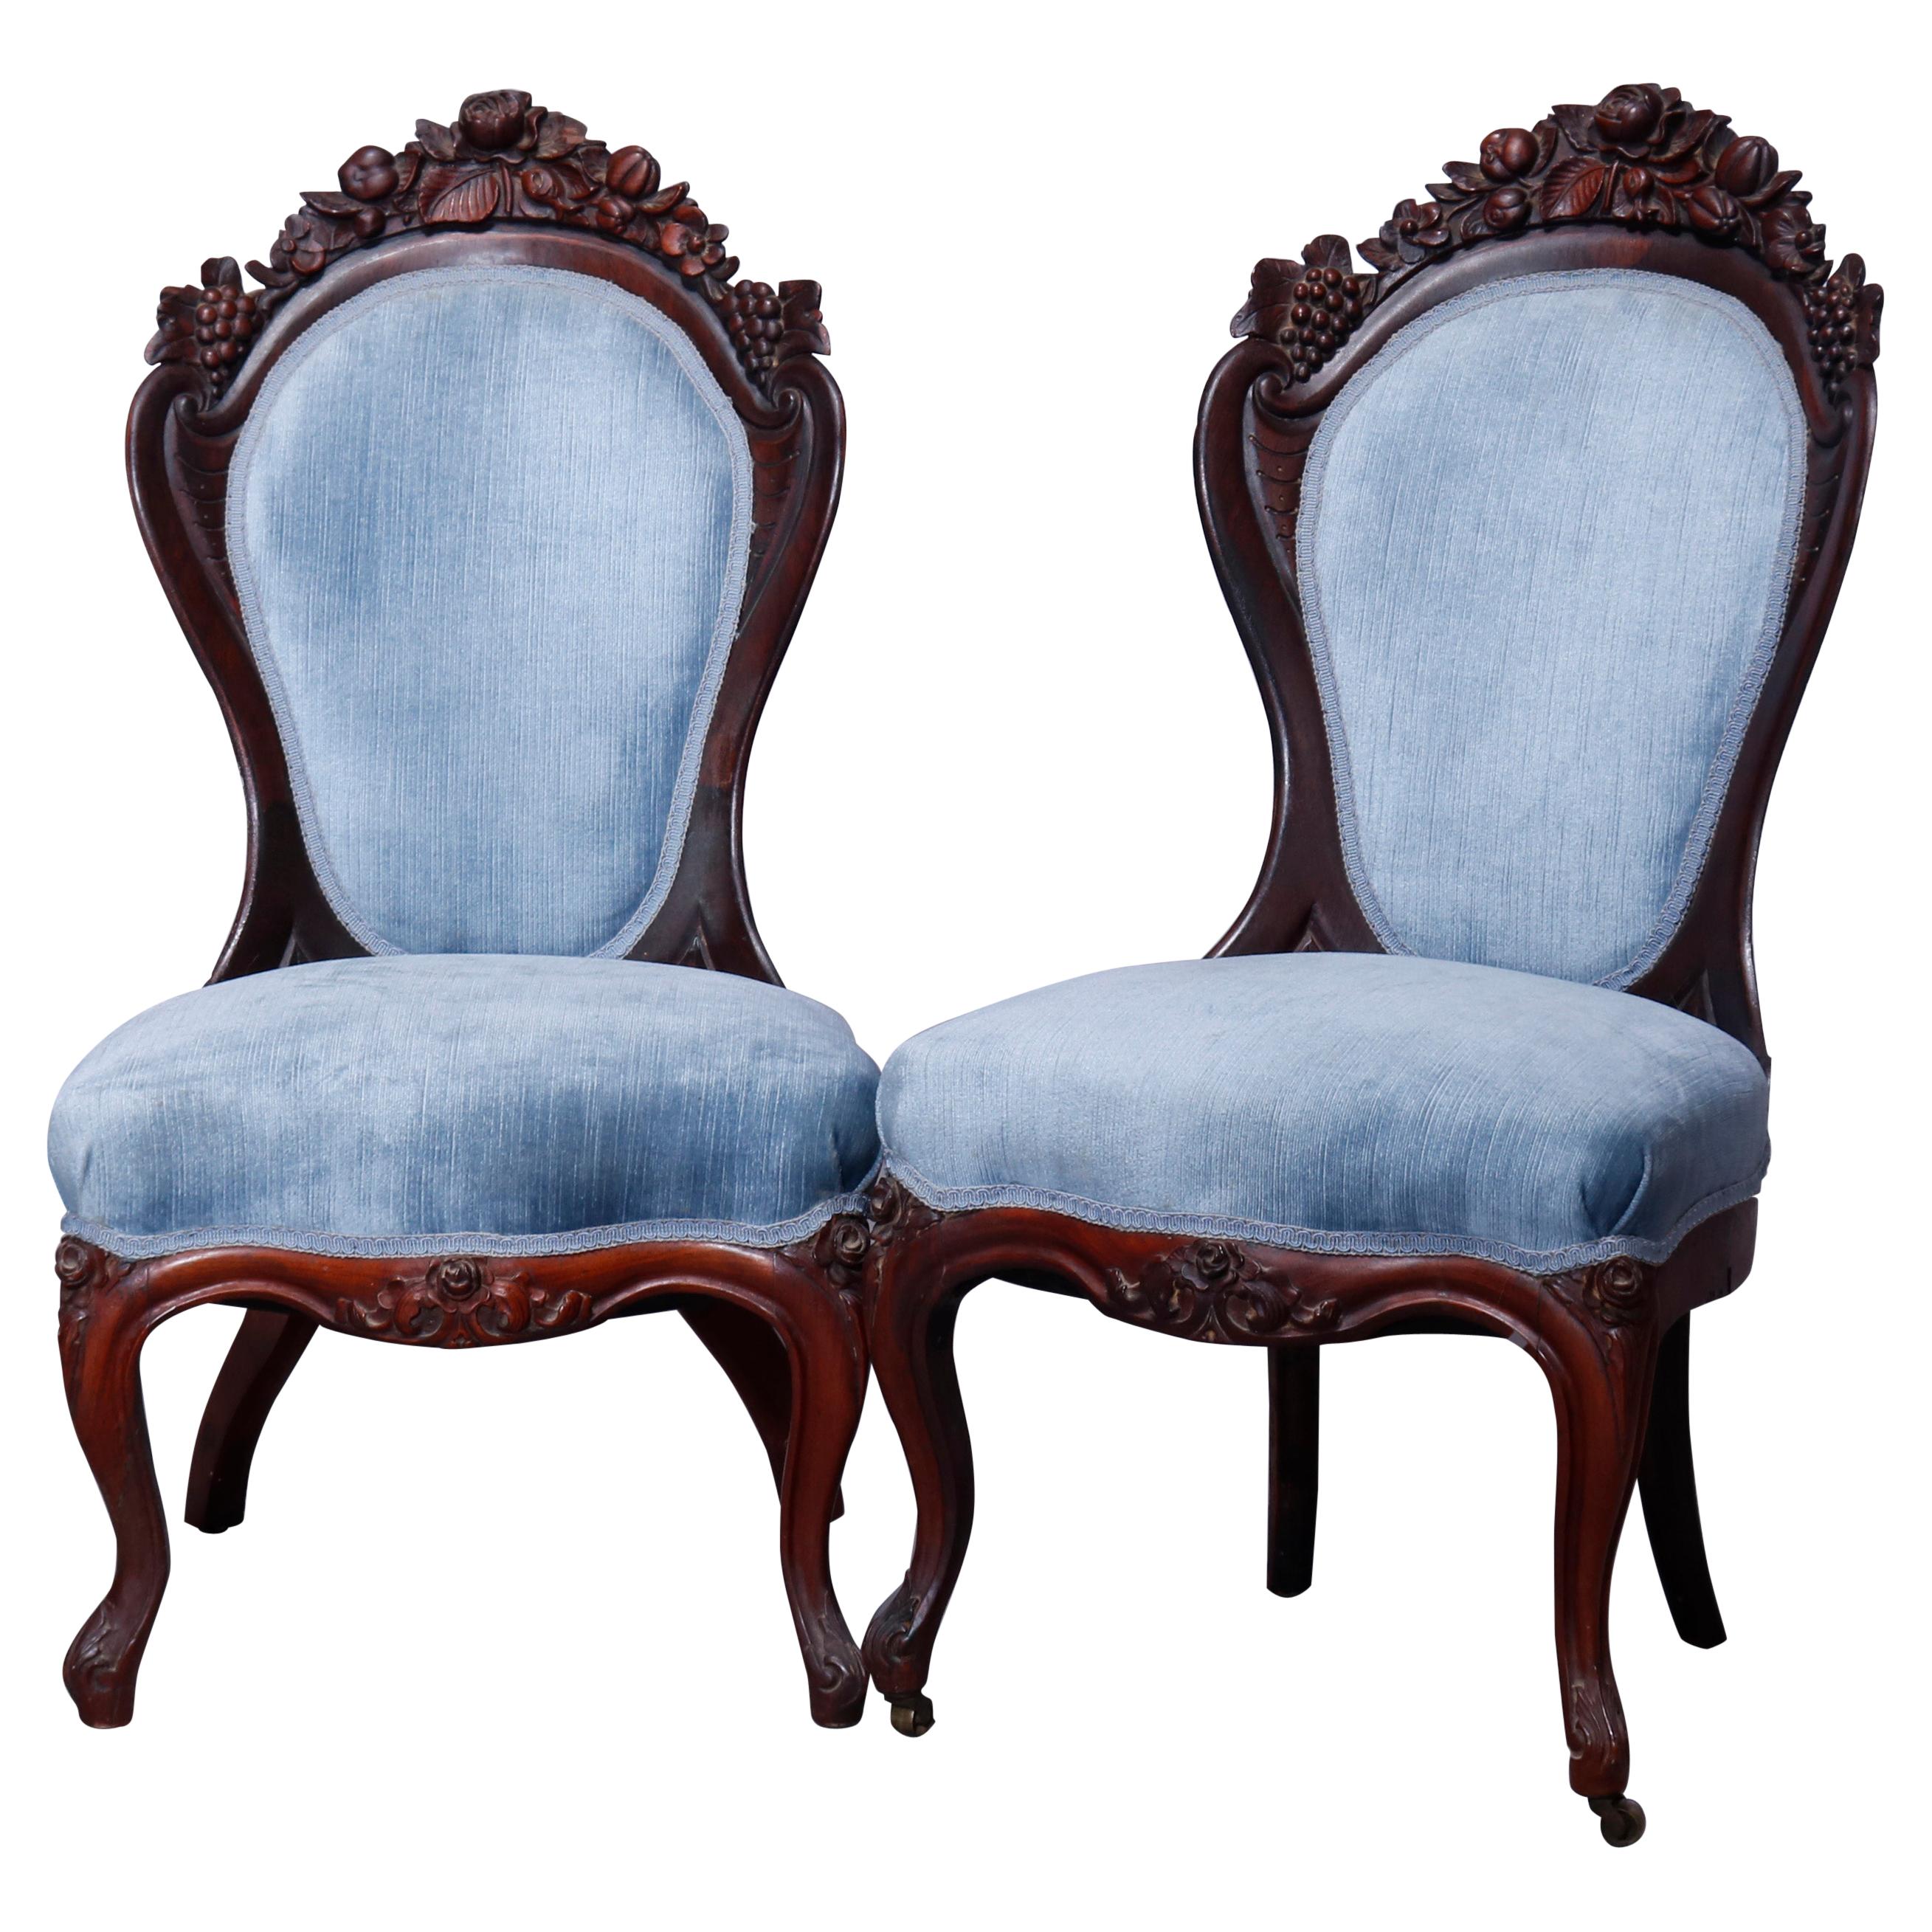 Pair Rococo Revival Belter Rosalie Laminated Rosewood Side Chairs, c1860